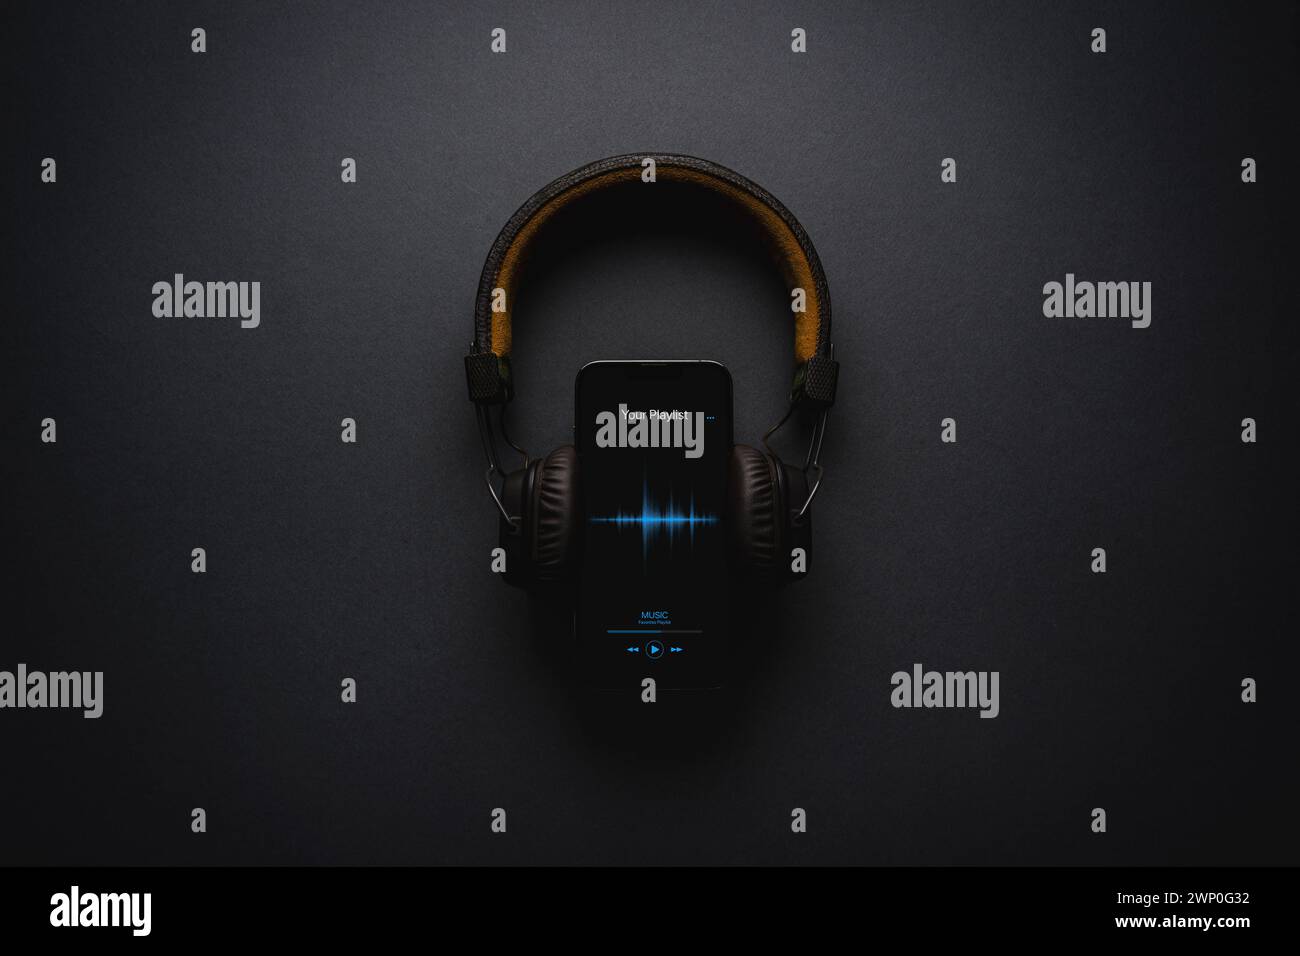 Smartphone with music player app and on-ear headphones on dark gray background Stock Photo